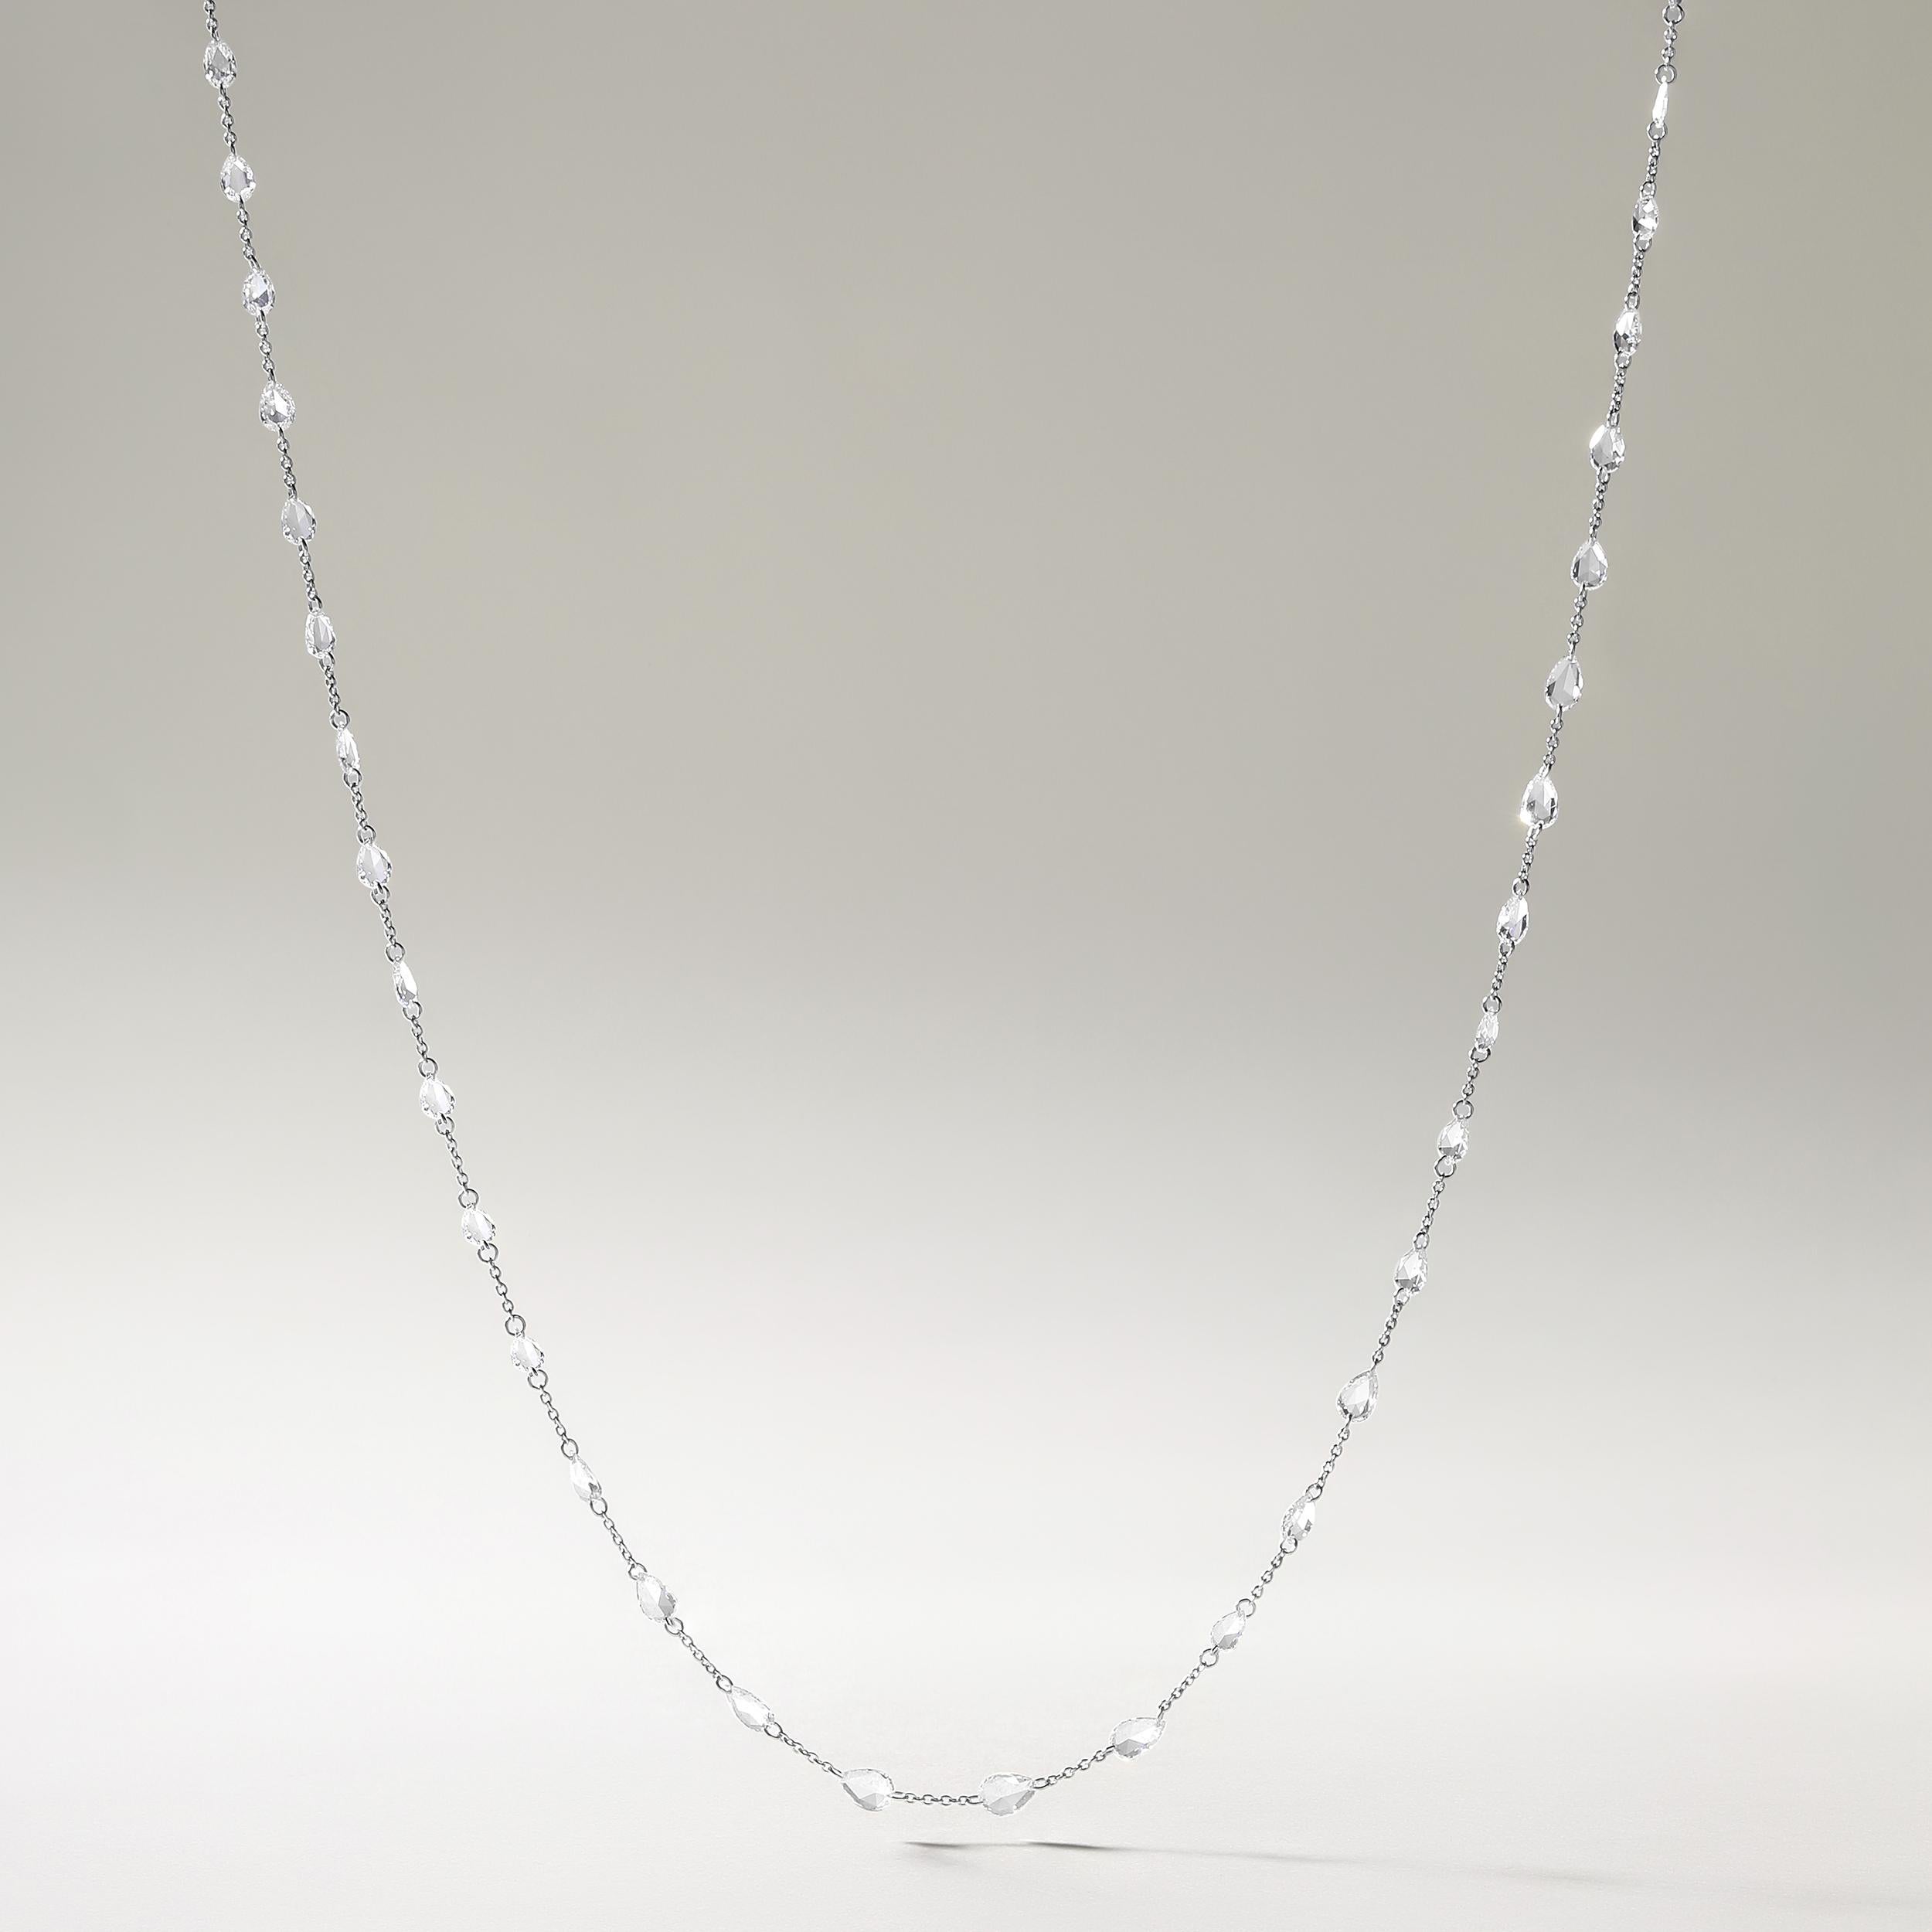 Crafted in 2.18 grams of 18K White Gold, the necklace contains 47 stones of Pear Shaped Rose Cut Natural Natural Diamonds with a total of 3.51 carat in E-F color and VVS-VS clarity. The necklace length is 18 inches.

CONTEMPORARY AND TIMELESS